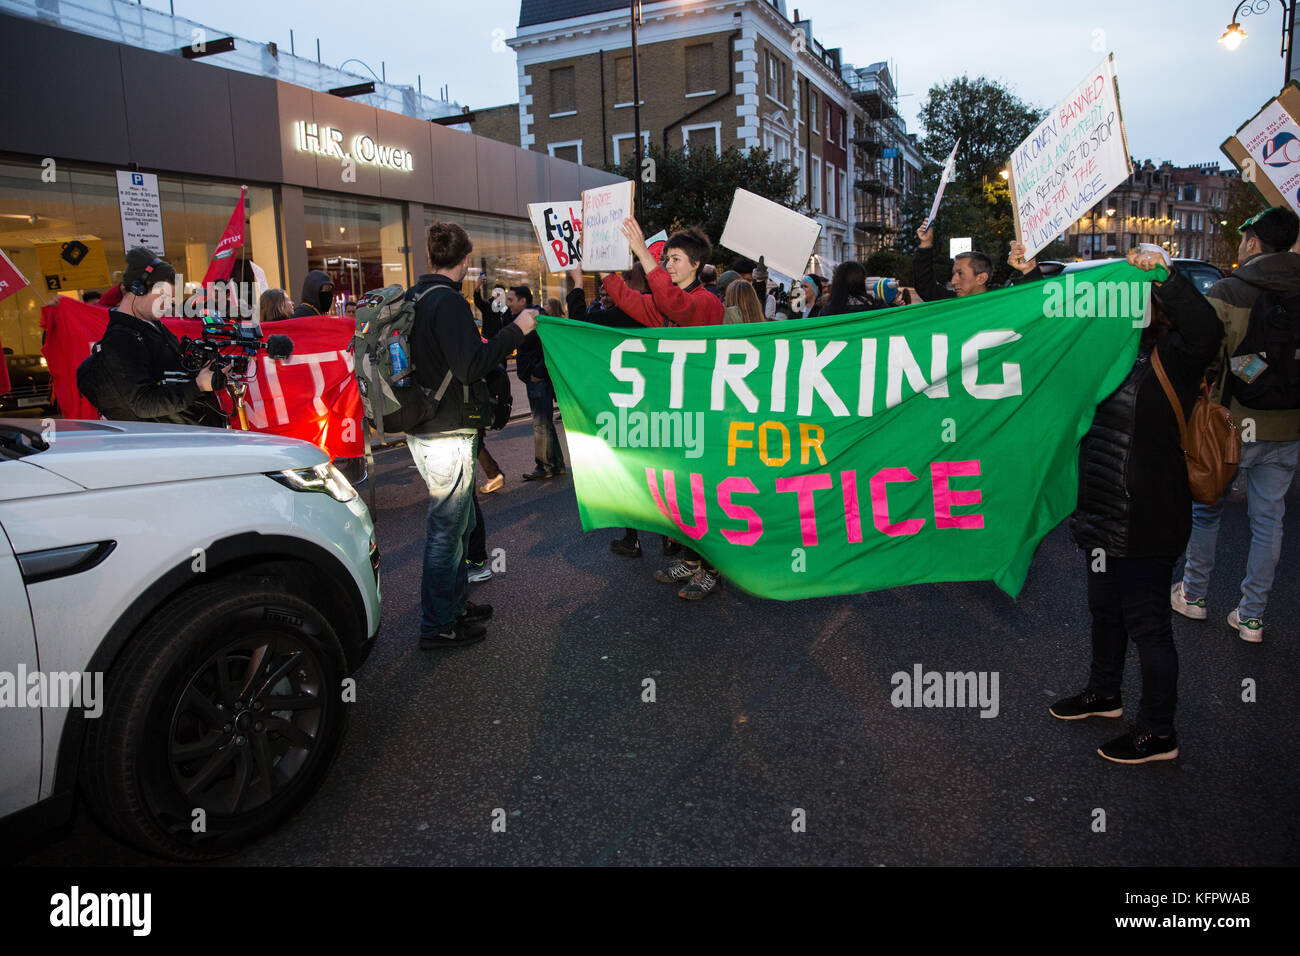 London, UK. 31st Oct, 2017. Supporters of migrant cleaners Angelica Valencia Bolanos and Fredy Lopez suspended without pay by contractor Templewood Cleaning for having joined trade union United Voices of the World and for having voted to strike for the London Living Wage protest outside luxury car dealer H.R. Owen's Ferrari showroom in South Kensington. The cleaners, a married couple, are the only cleaners responsible for cleaning H.R. Owen's Ferrari showroom via contractor Templewood Cleaning. Credit: Mark Kerrison/Alamy Live News Stock Photo